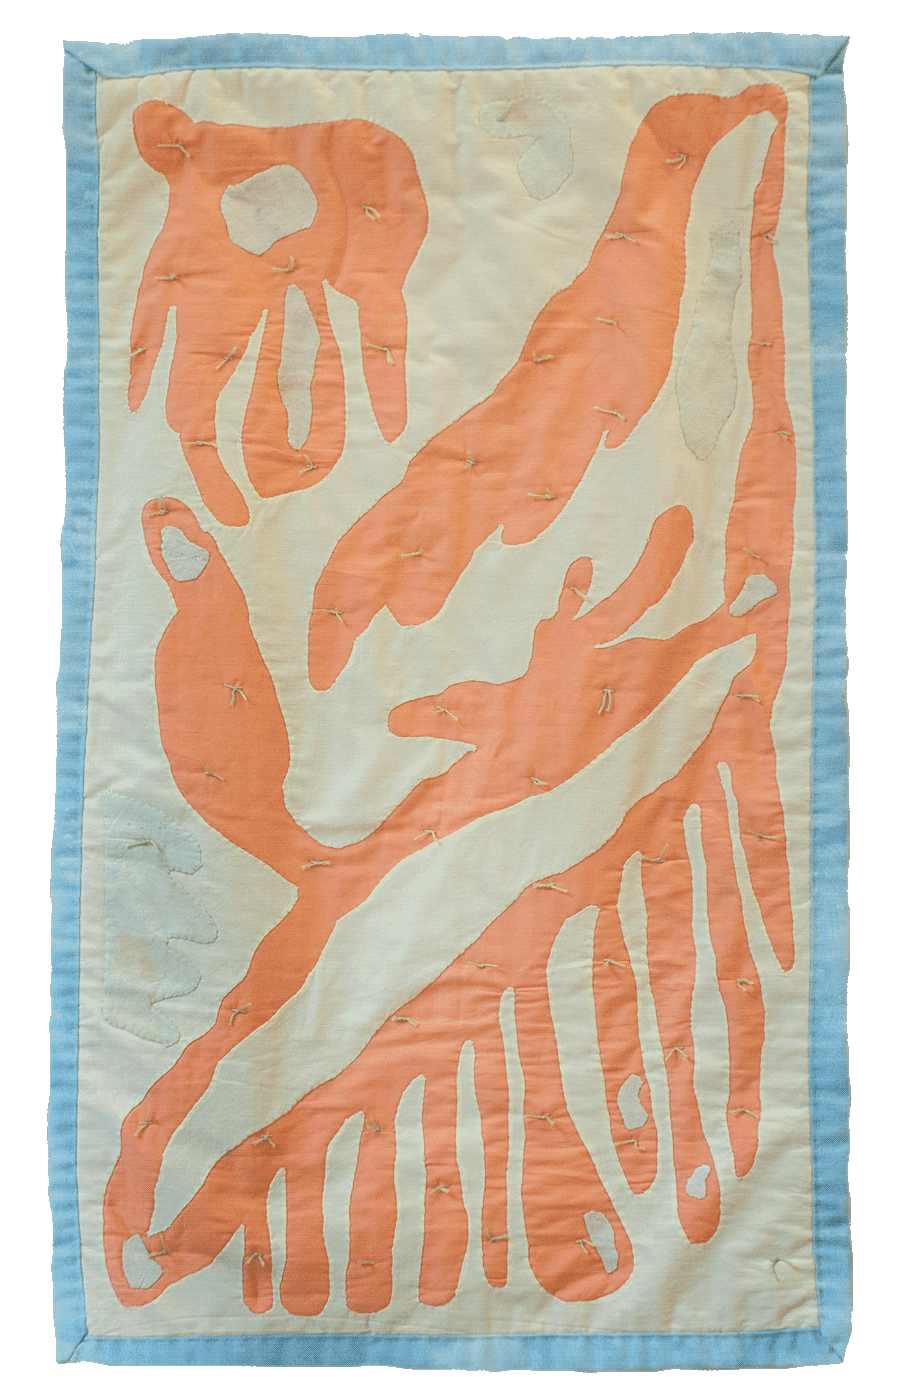 A pale yellow quilt has salmon pink organic shapes throughout the surface and 
                there are light green knots within the salmon pink shapes. The quilt has a light blue
                binding.